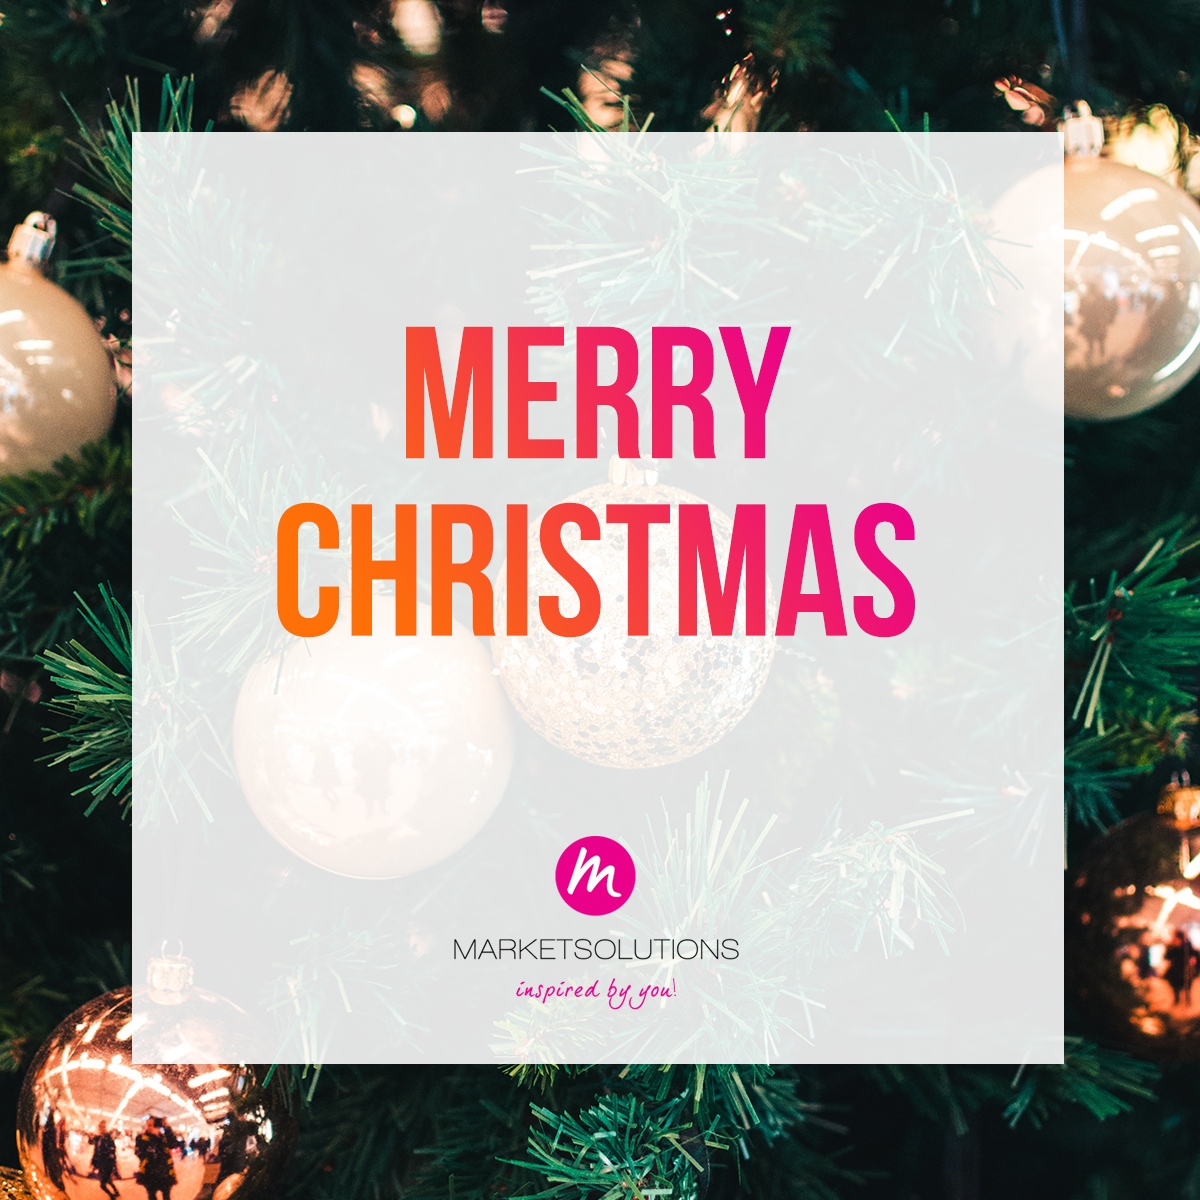 Team Marketsolutions wishes you a Merry Christmas! 🎄

#kerst #christmas #xmas